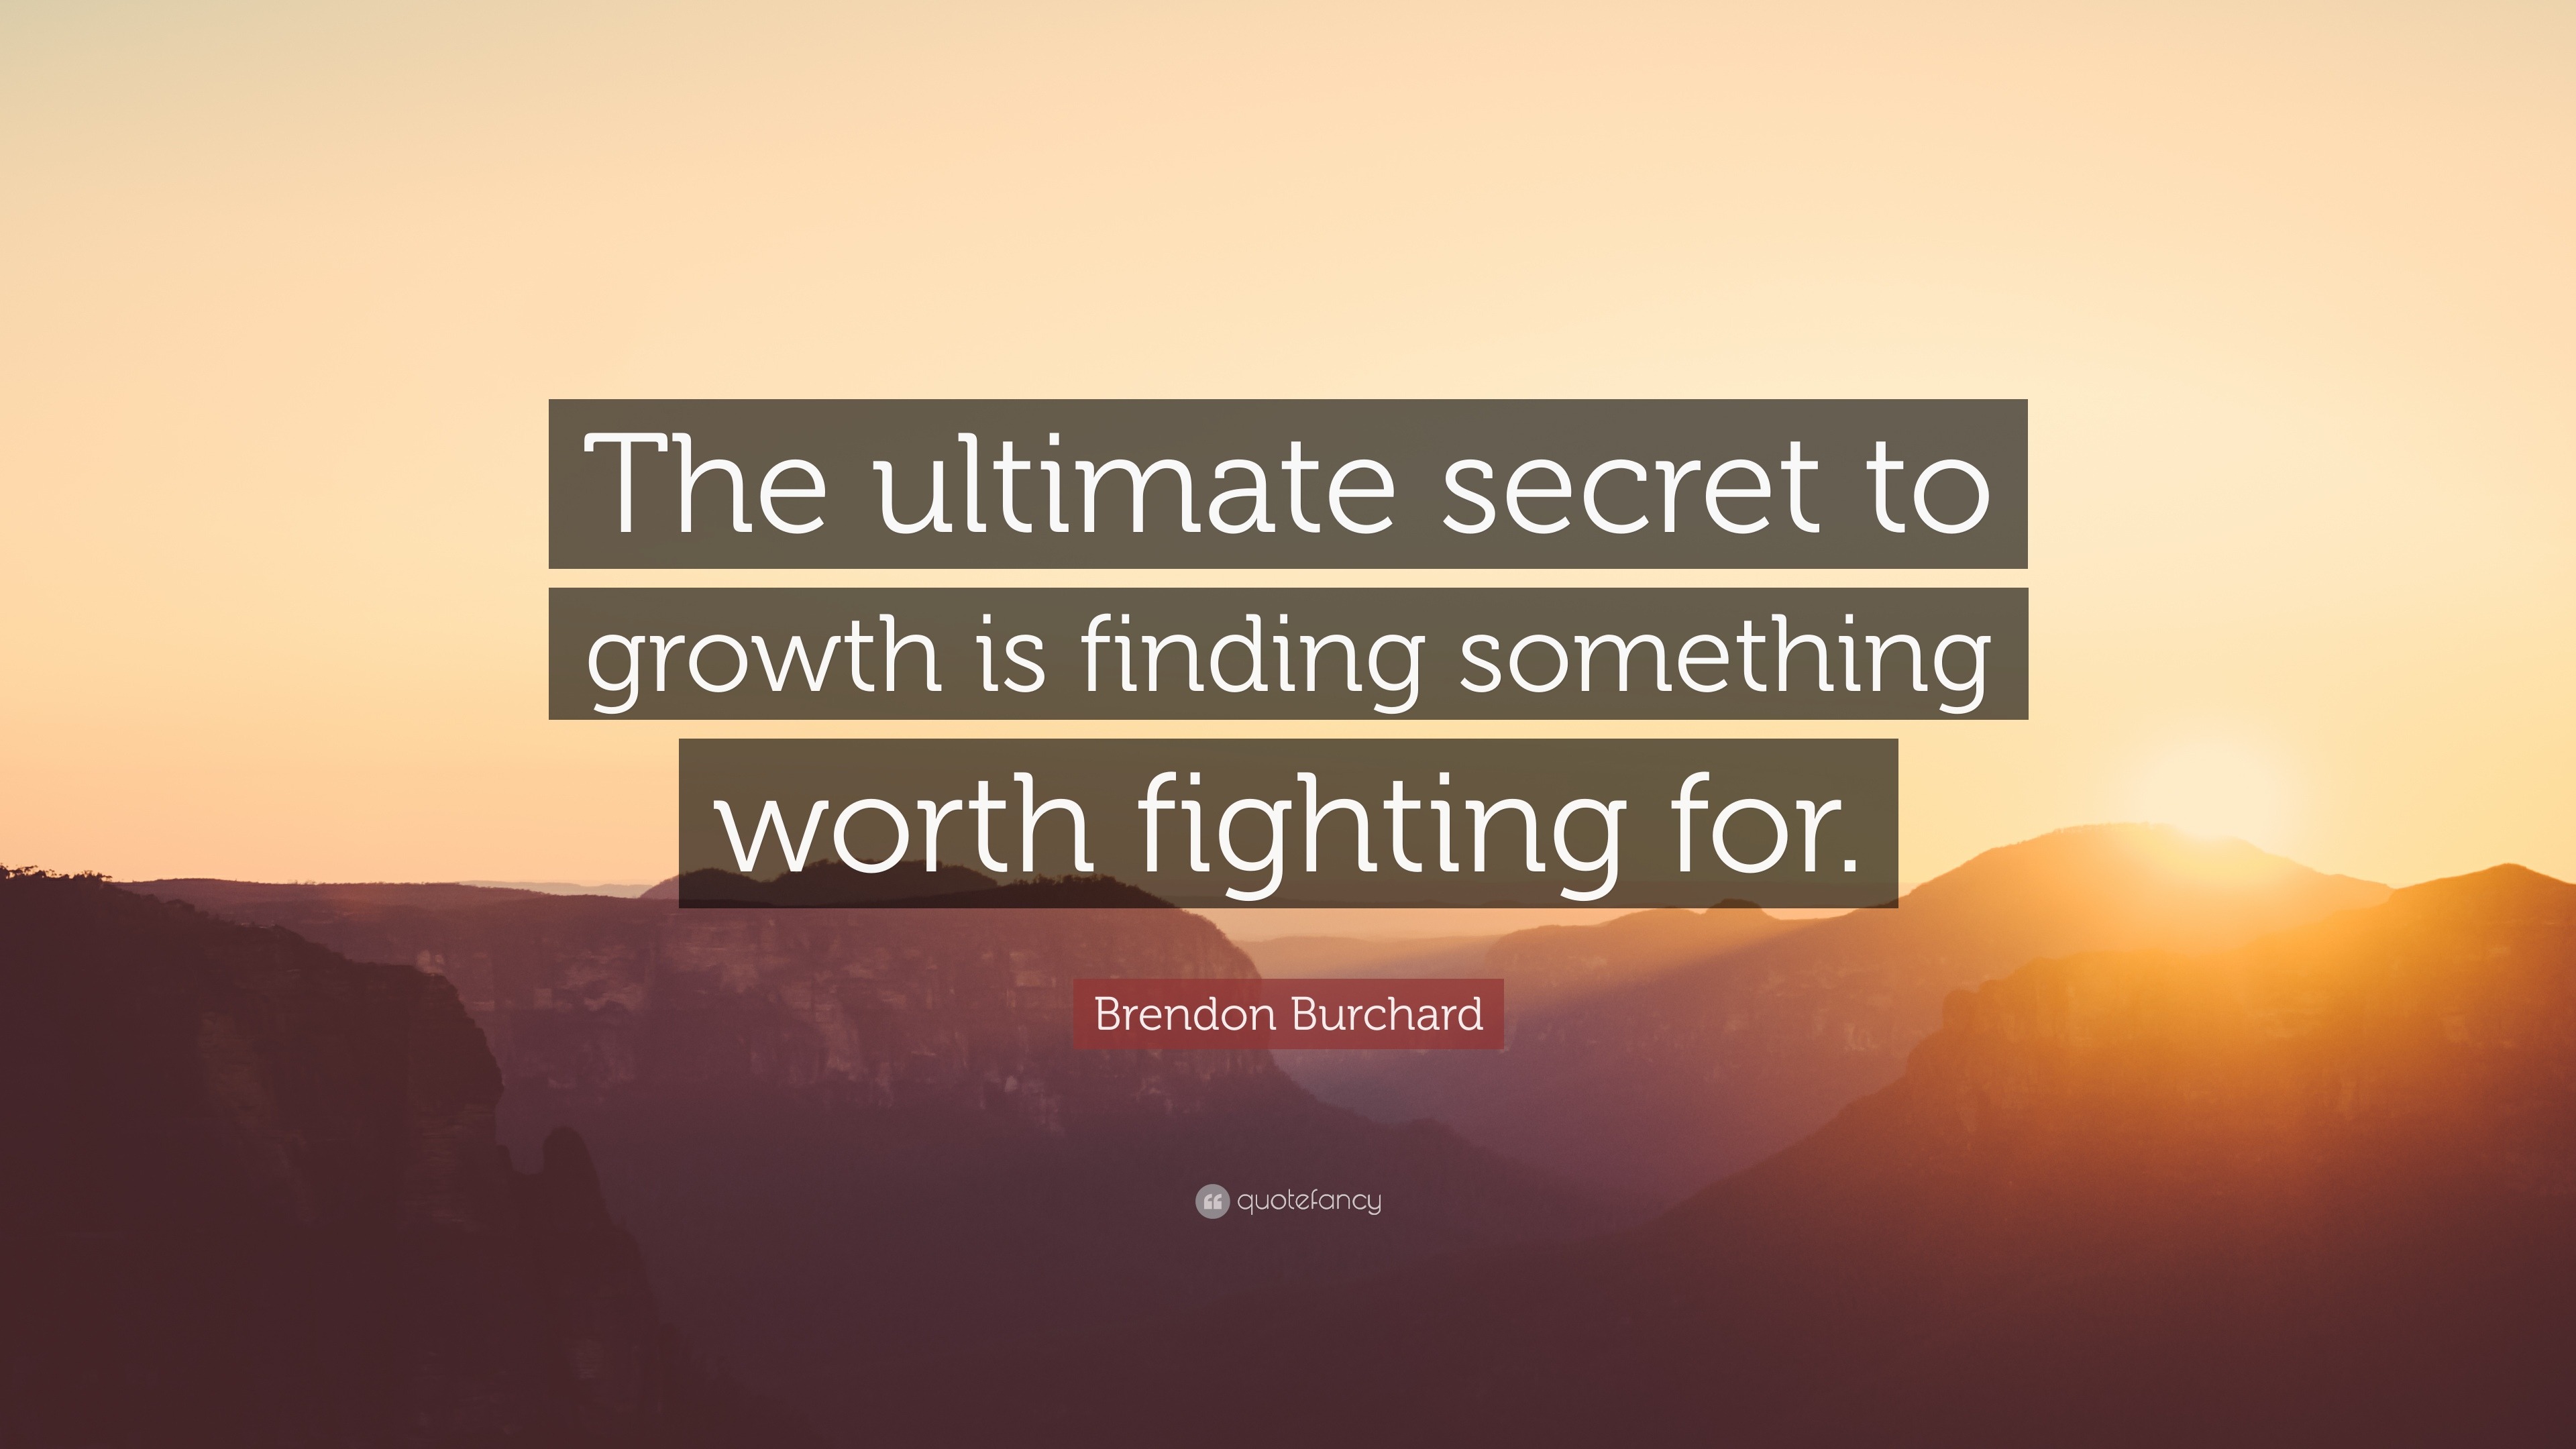 Brendon Burchard Quote “The ultimate secret to growth is finding something worth fighting for